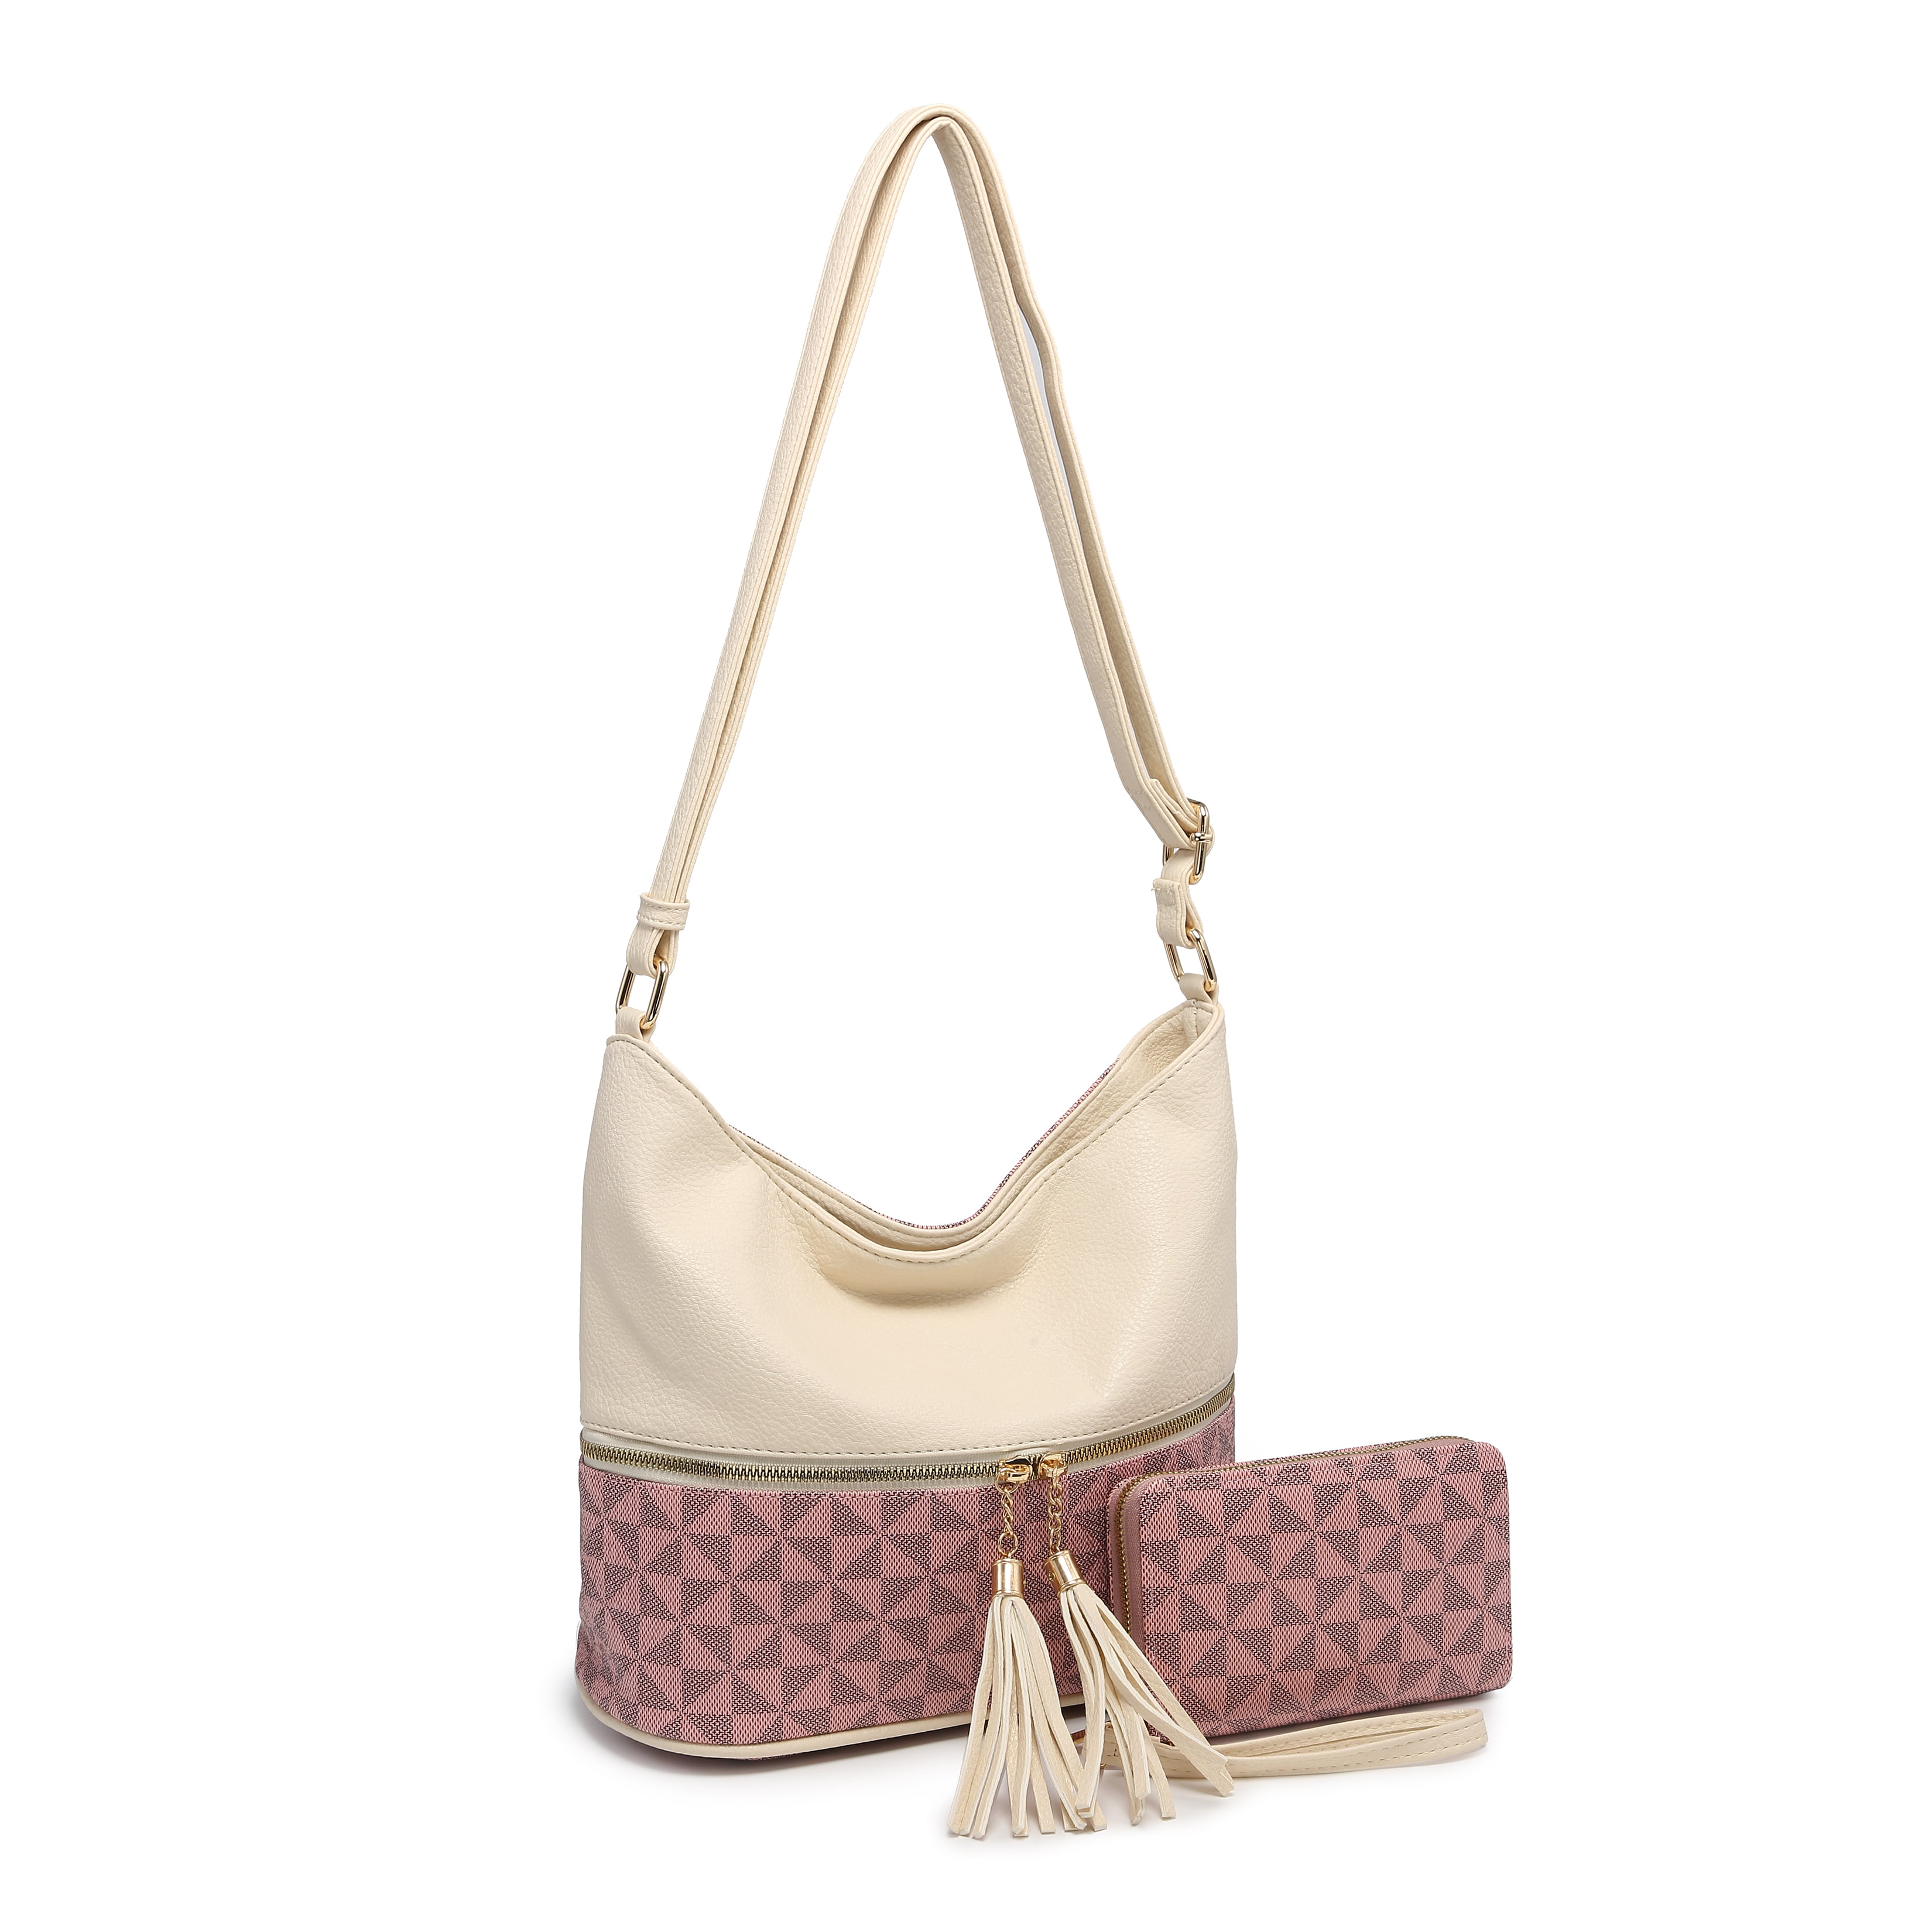 10 1/2 x 7 1/2 x 2 Gold on White Snakeskin Print Adjustable Straps 7 Pockets Cross body or Shoulder Purse Light Weight